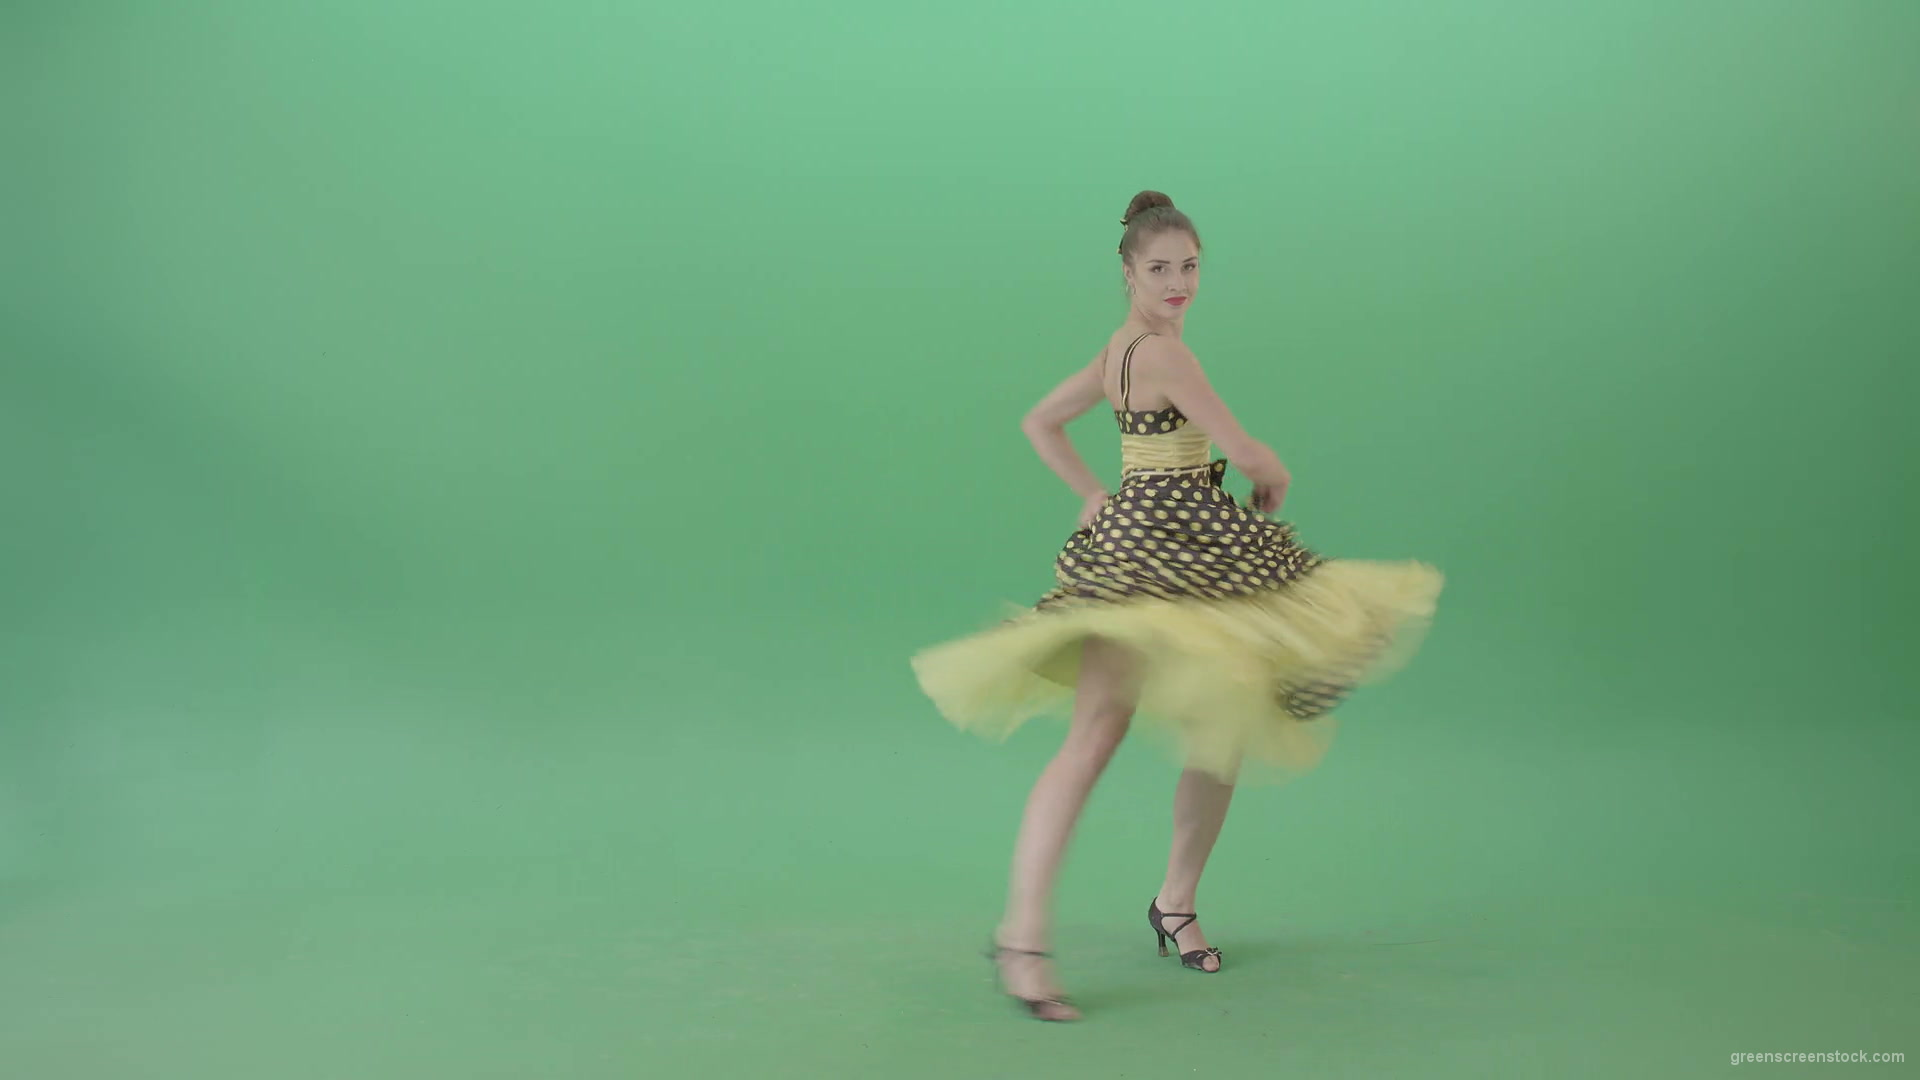 Beautiful-Woman-dancing-Boogie-woogie-and-jumping-in-Jazz-dance-isolated-on-Green-Screen-4K-Video-Footage-1920_008 Green Screen Stock